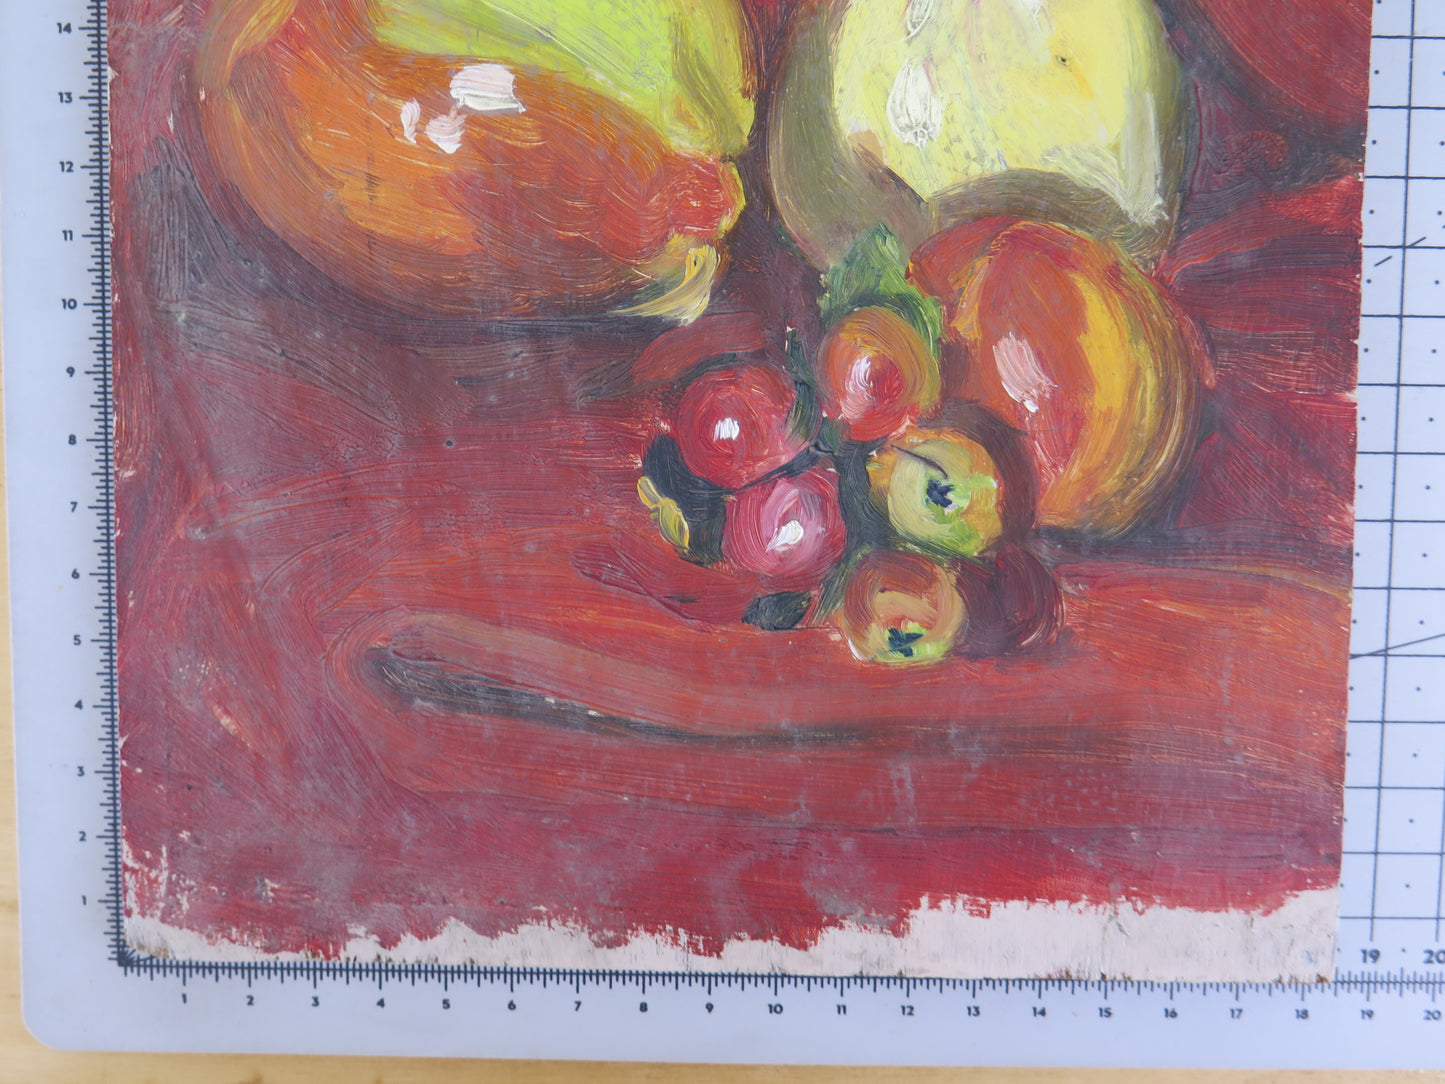 28x22 cm ANTIQUE PAINTING SKETCH OIL PAINTING ON TABLE STILL LIFE FRUIT MD12